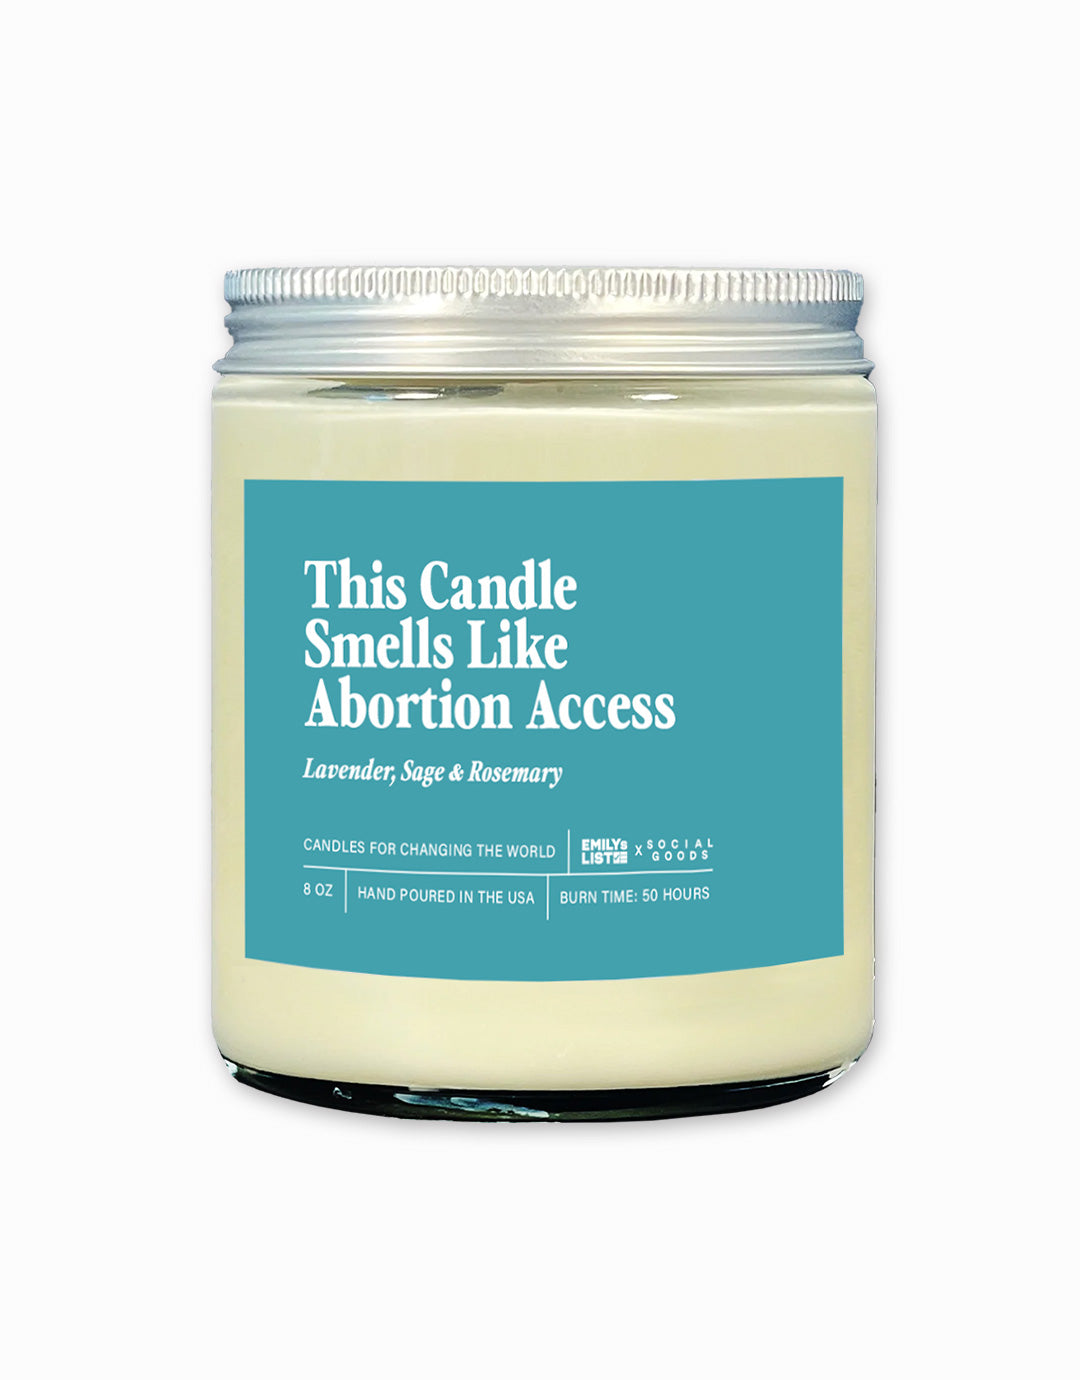 The Abortion Access Candle